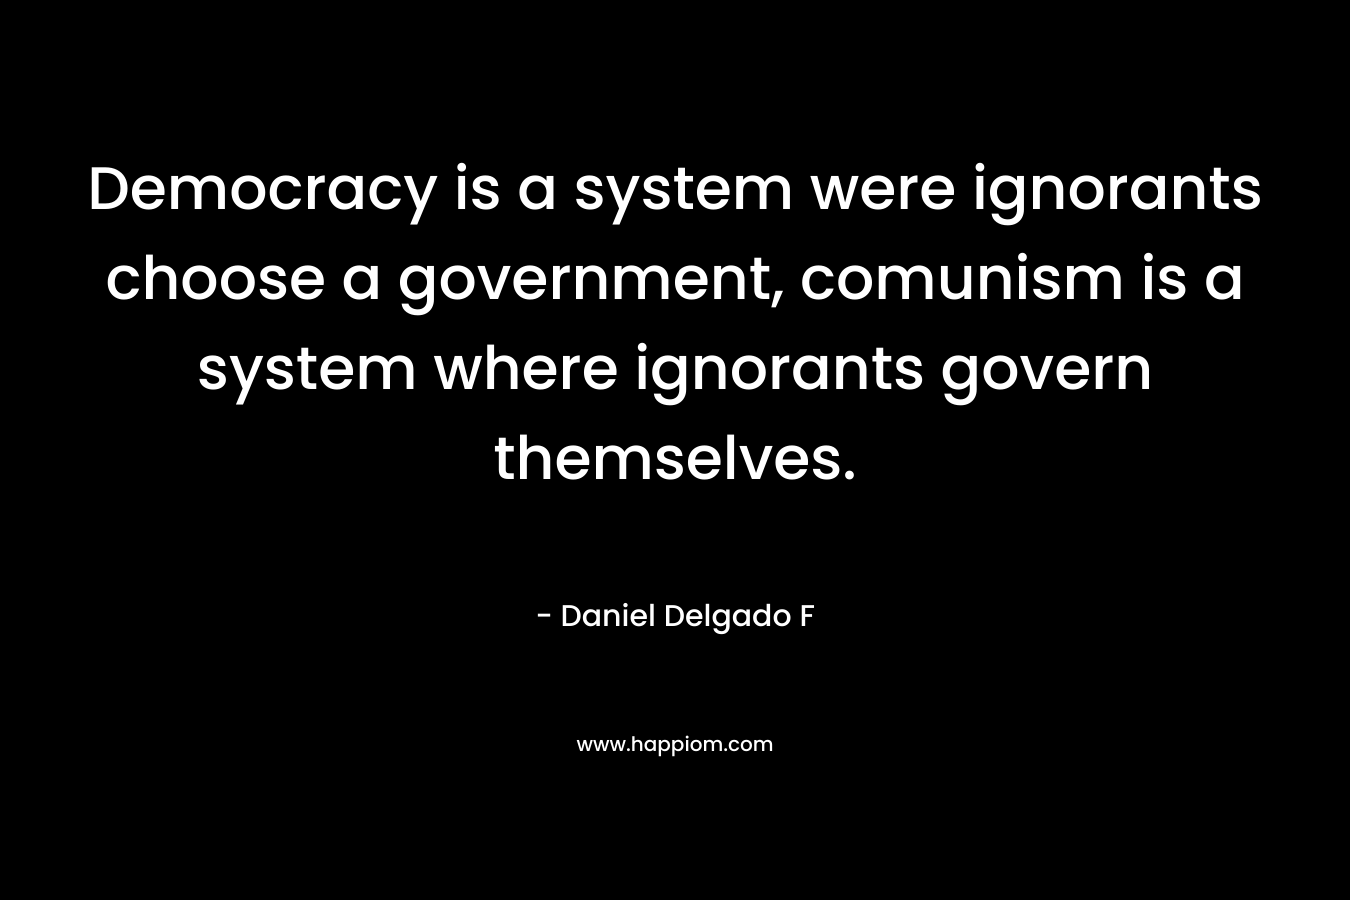 Democracy is a system were ignorants choose a government, comunism is a system where ignorants govern themselves. – Daniel Delgado F